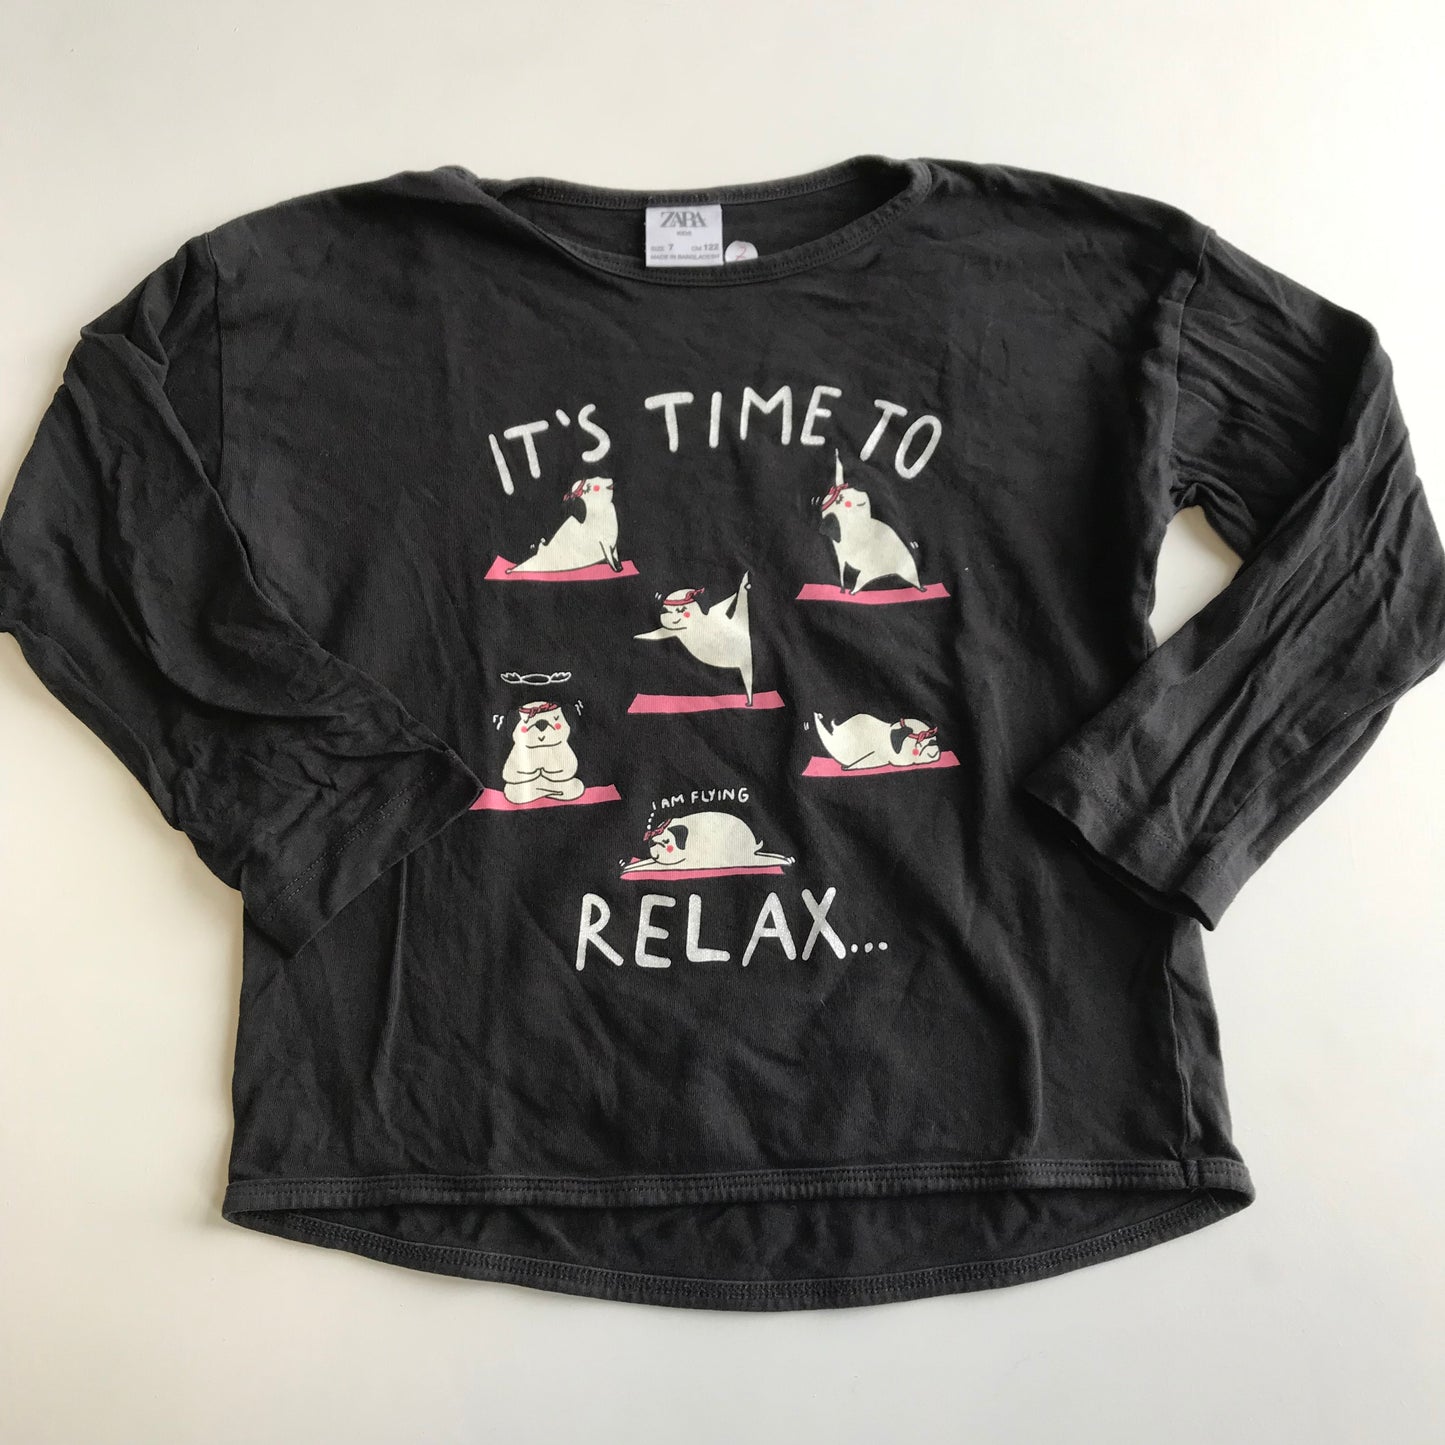 T-shirt - It's Time to Relax - Age 7